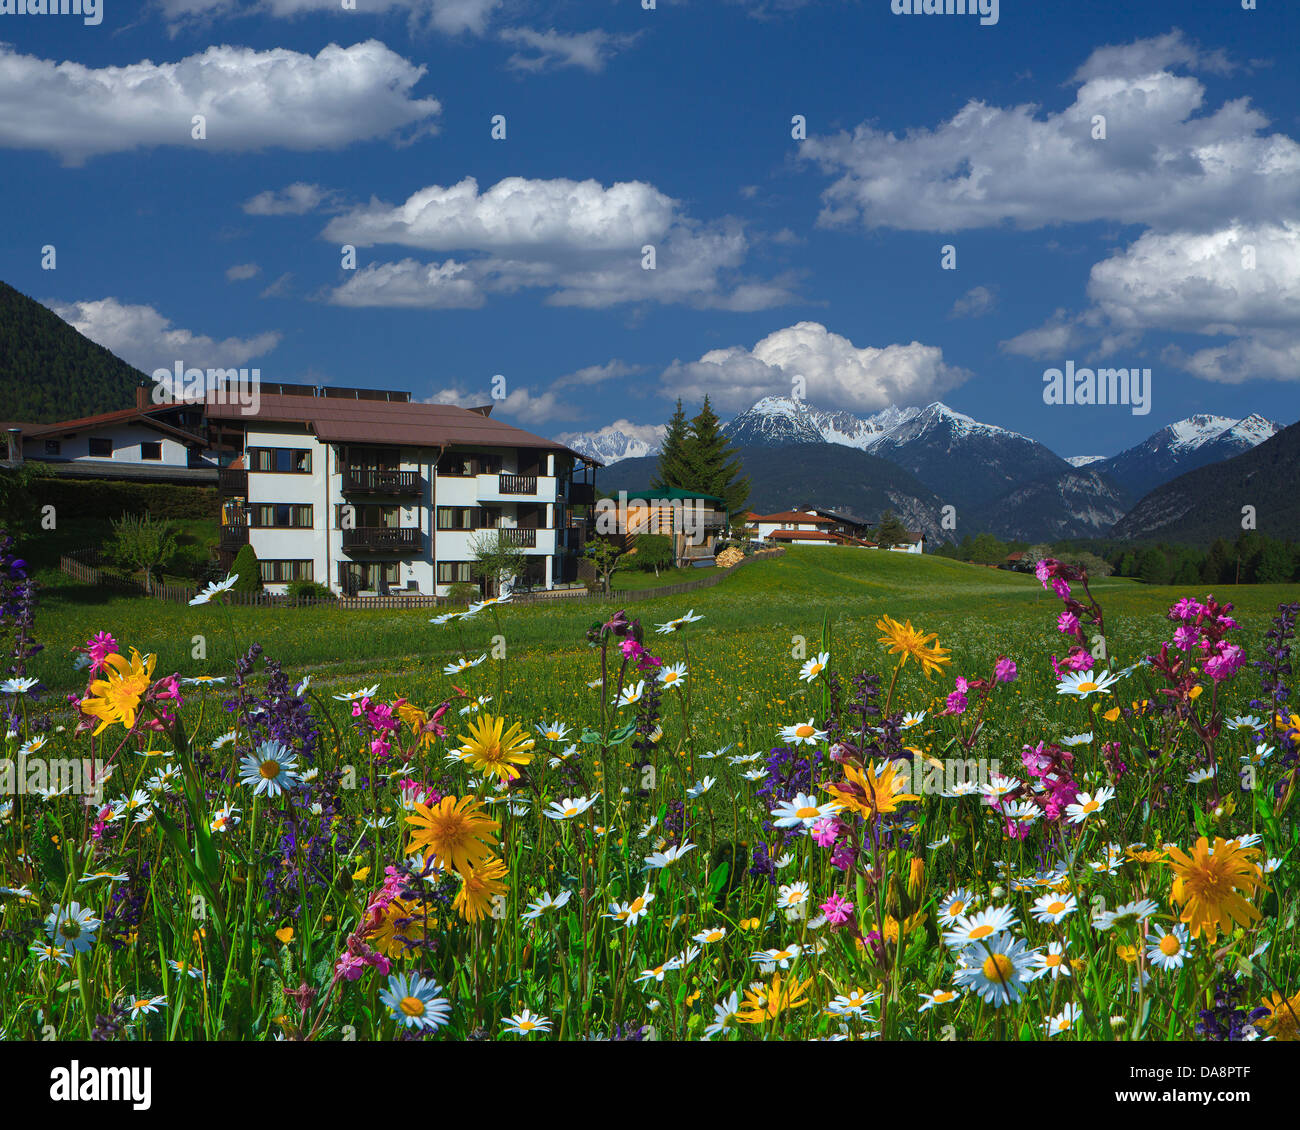 Austria, Europe, Tyrol, Mieminger plateau, Obsteig, Holzleiten, hotel, houses, homes, meadow, flowers, flower meadow, spring, sk Stock Photo